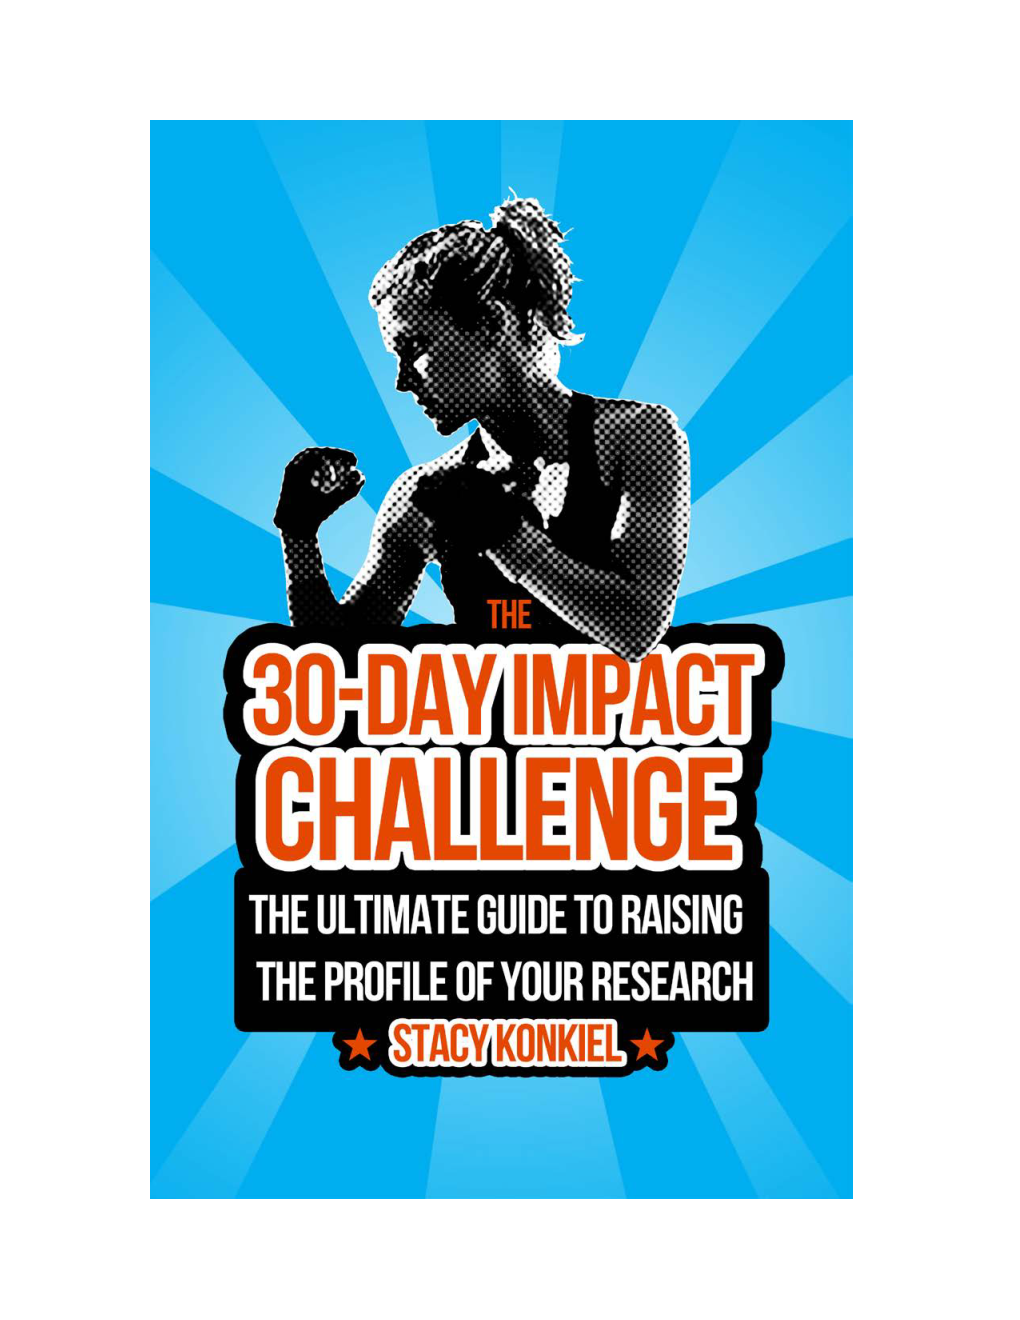 30-Day Impact Challenge: the Ultimate Guide to Raising the Profile of Your Research by Stacy Konkiel